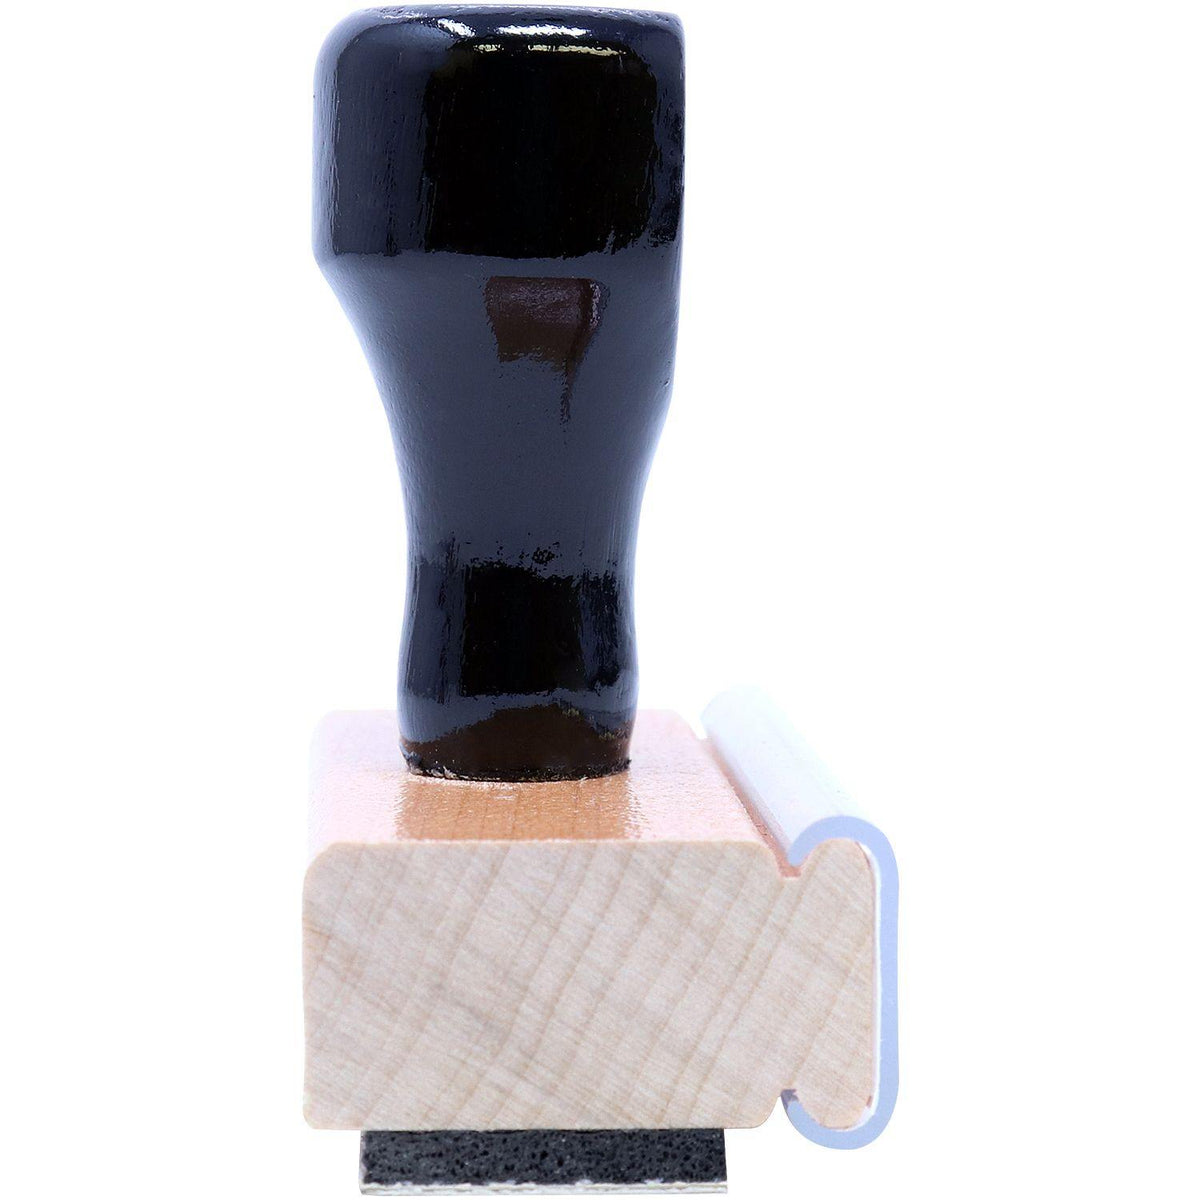 Side View of Large Hmo Ppo Rubber Stamp